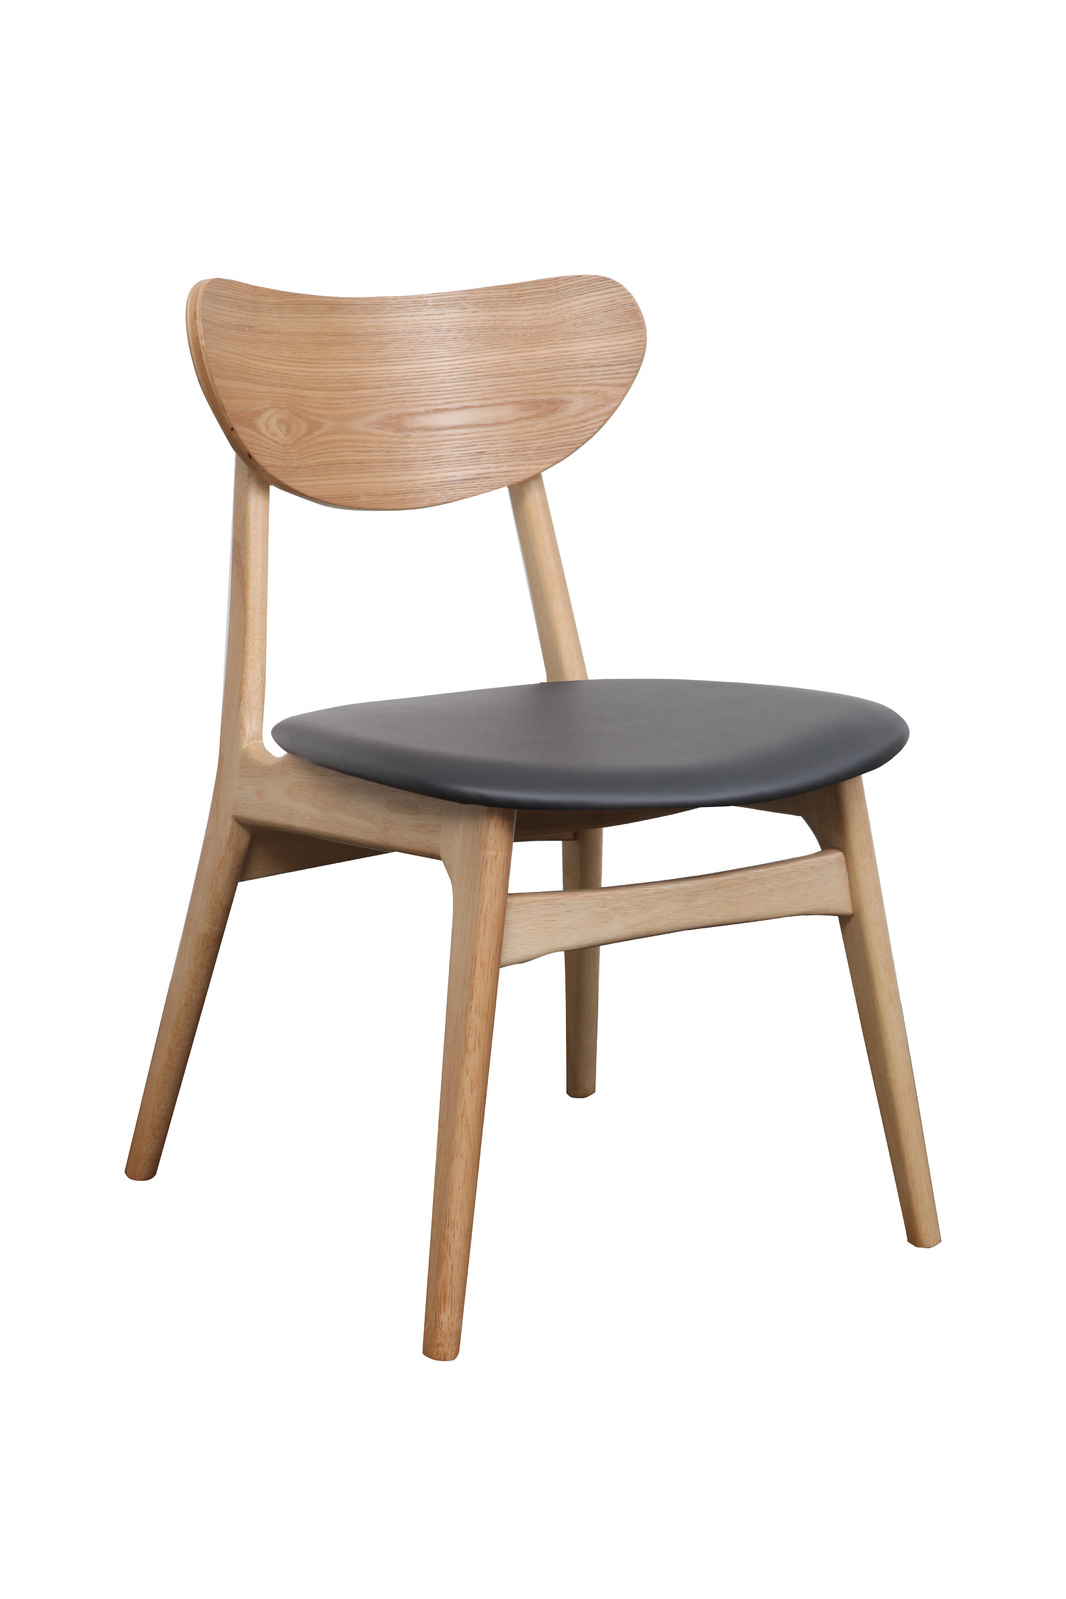 Finland Dining Chair Cafe Bar Natural Timber Frame with Black PU Seat